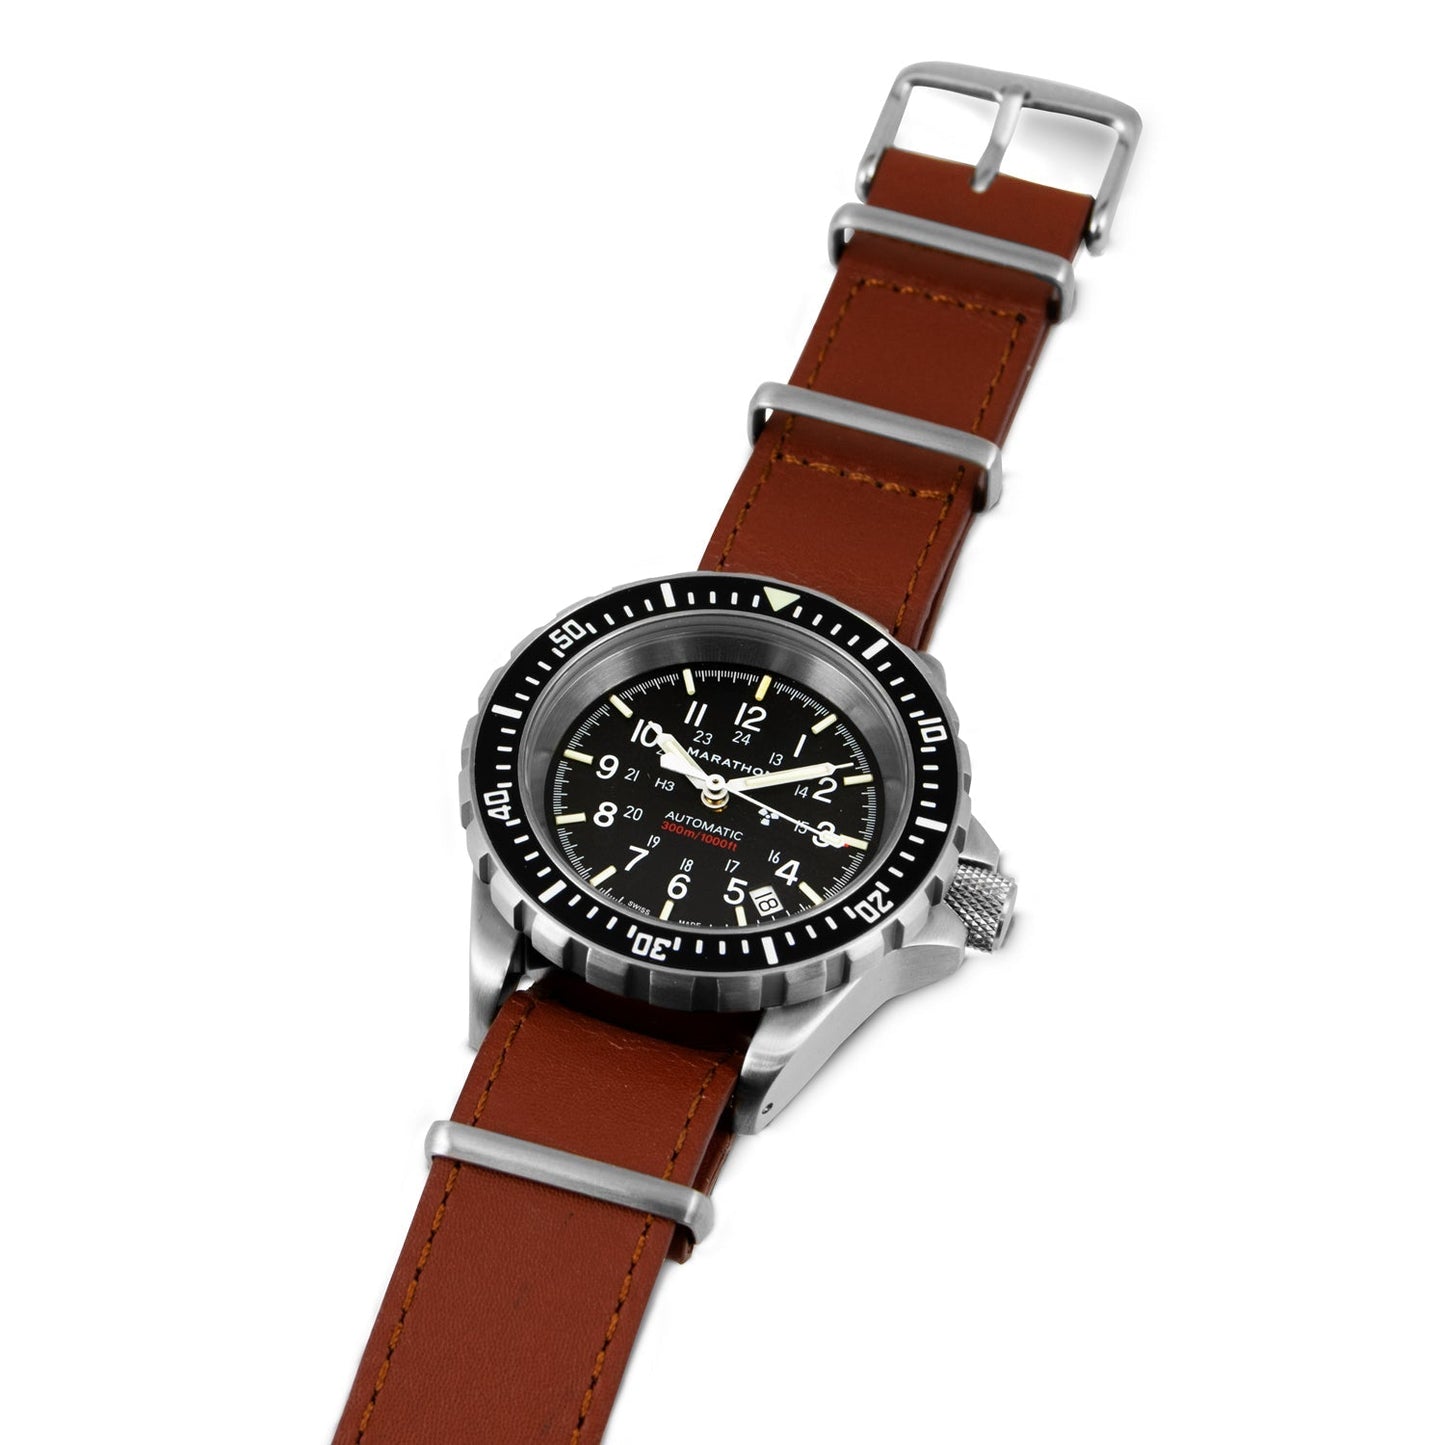 Marathon Leather NATO Watch Band/Strap with Stainless Steel Square Buckle